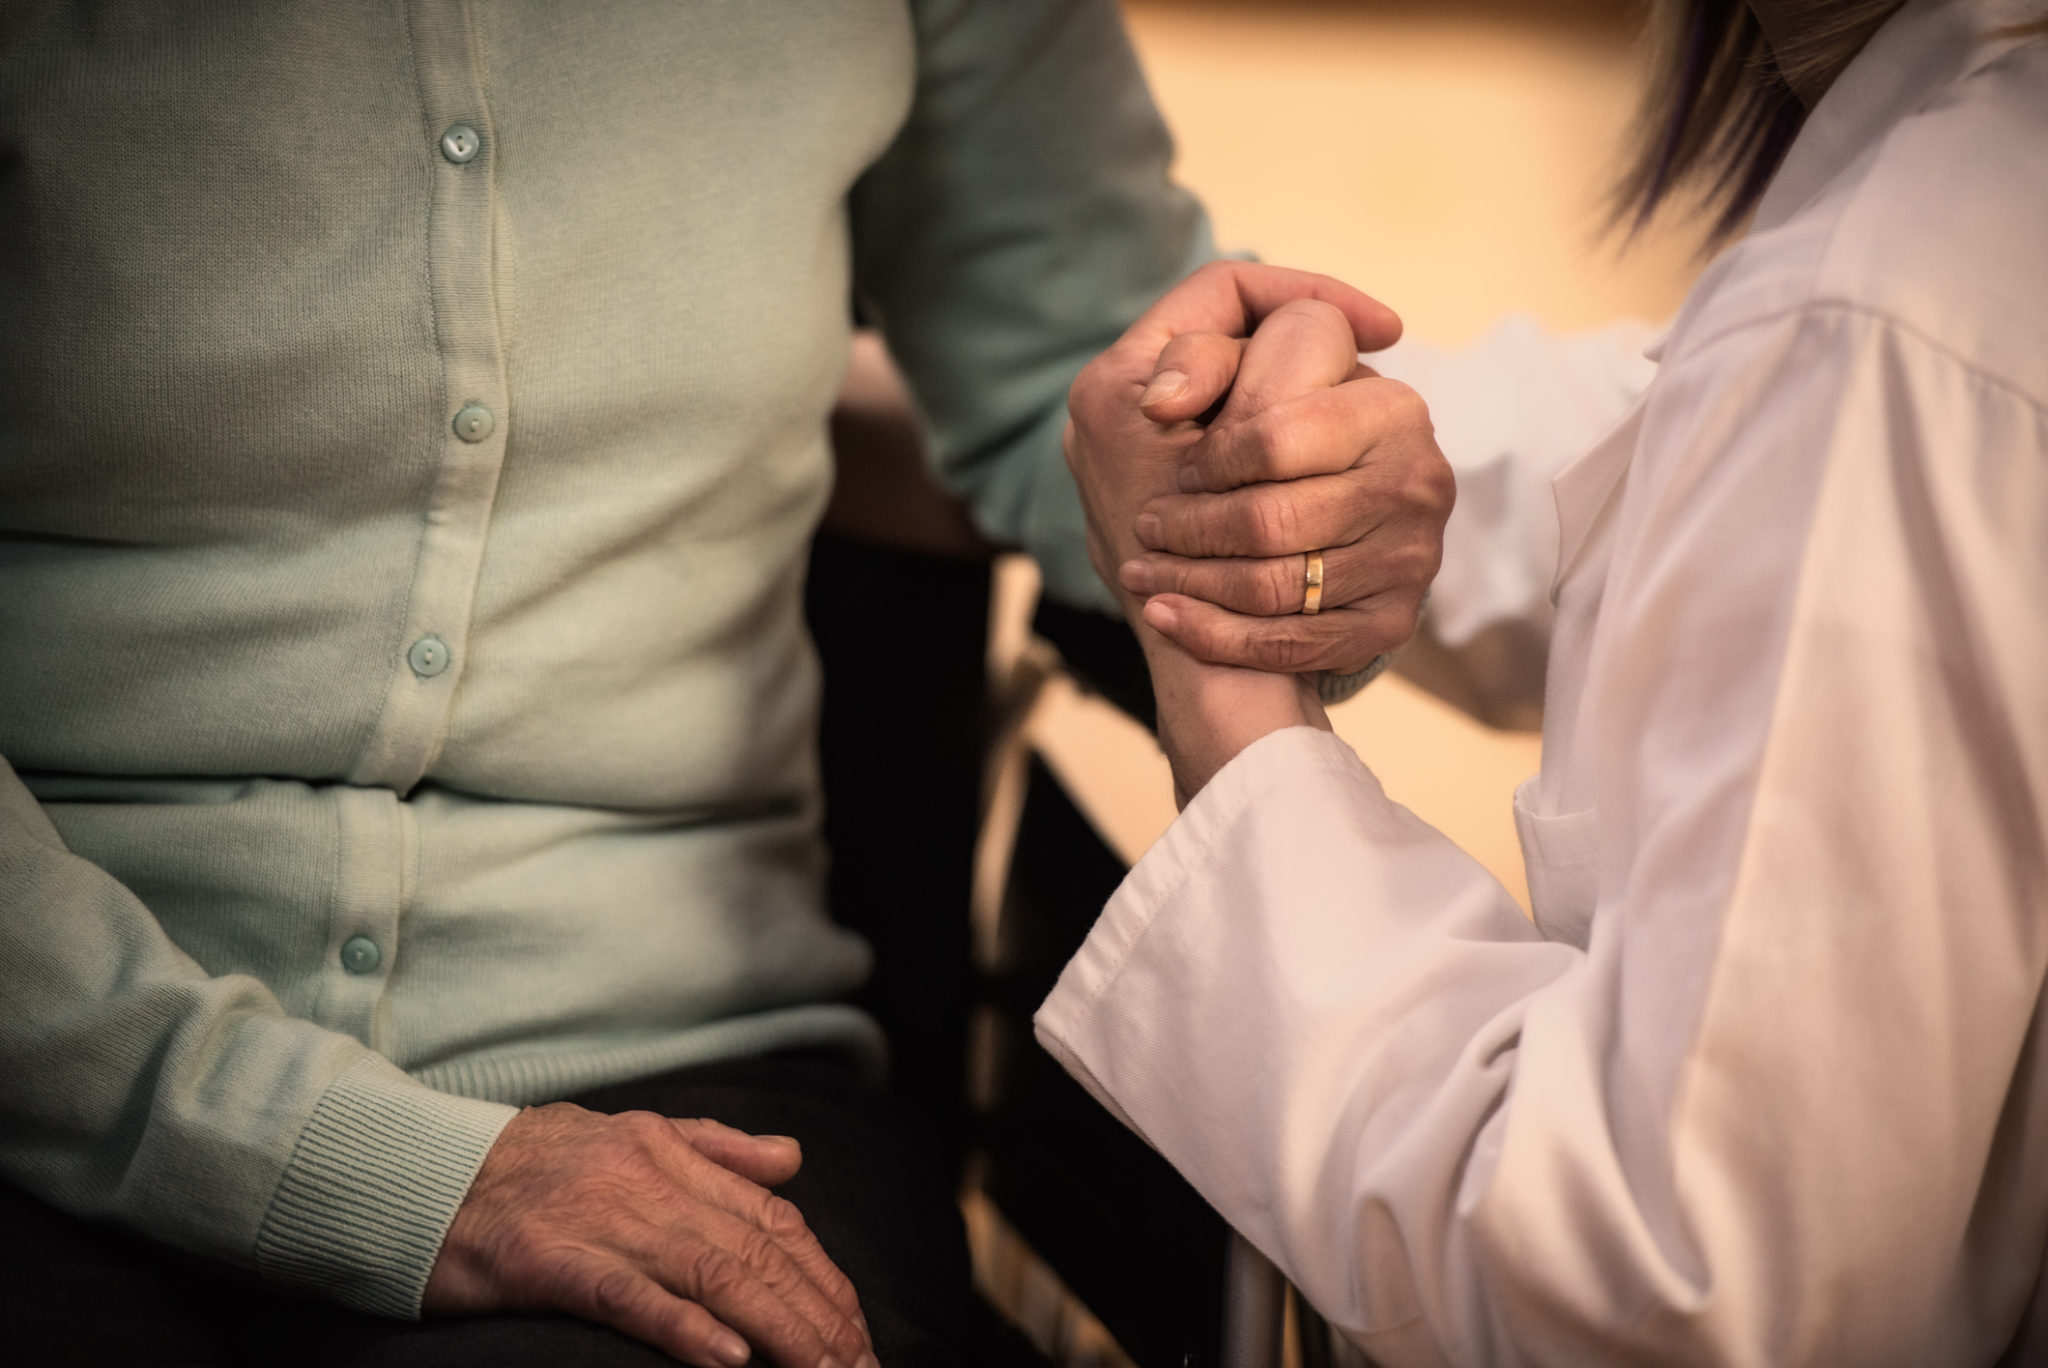 A nurse in a white coat tending to a disabled senior person, giving him a hand. Only torso and hands visible.